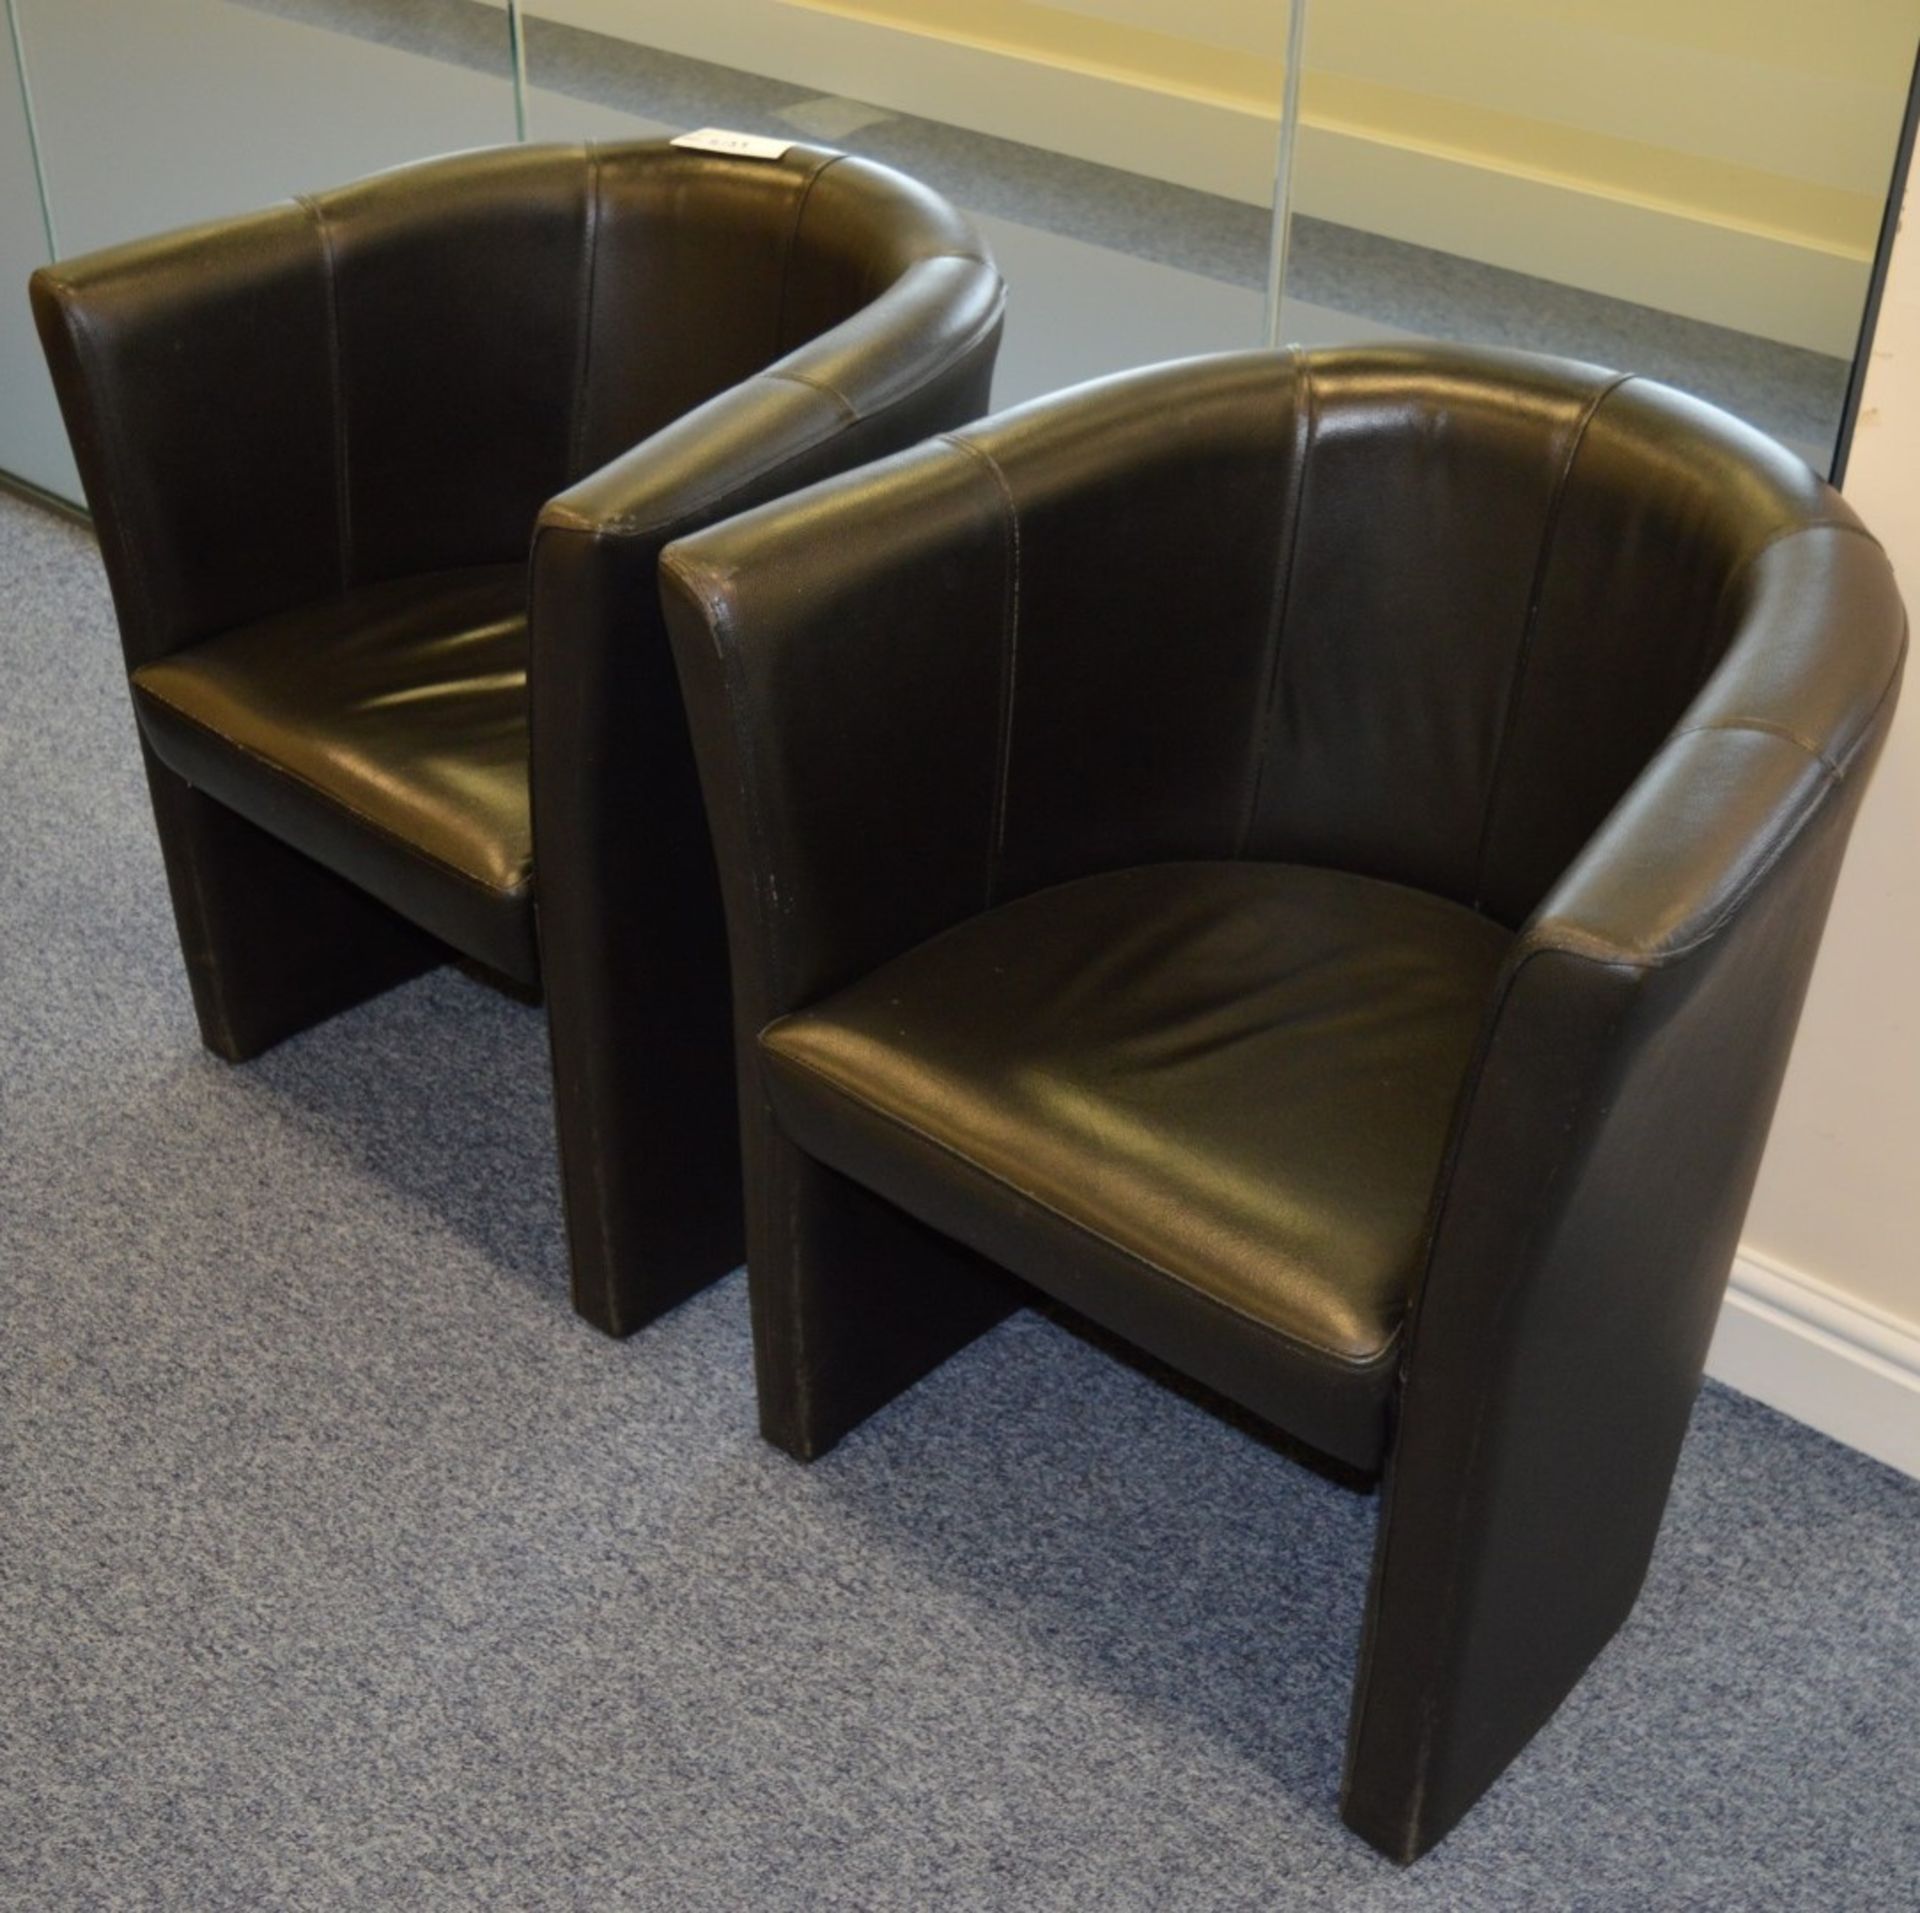 2 x Black Faux Leather Tub Chairs - Ideal For Waiting Rooms, Meeting Rooms or The Home - H73 x E70 x - Image 2 of 2